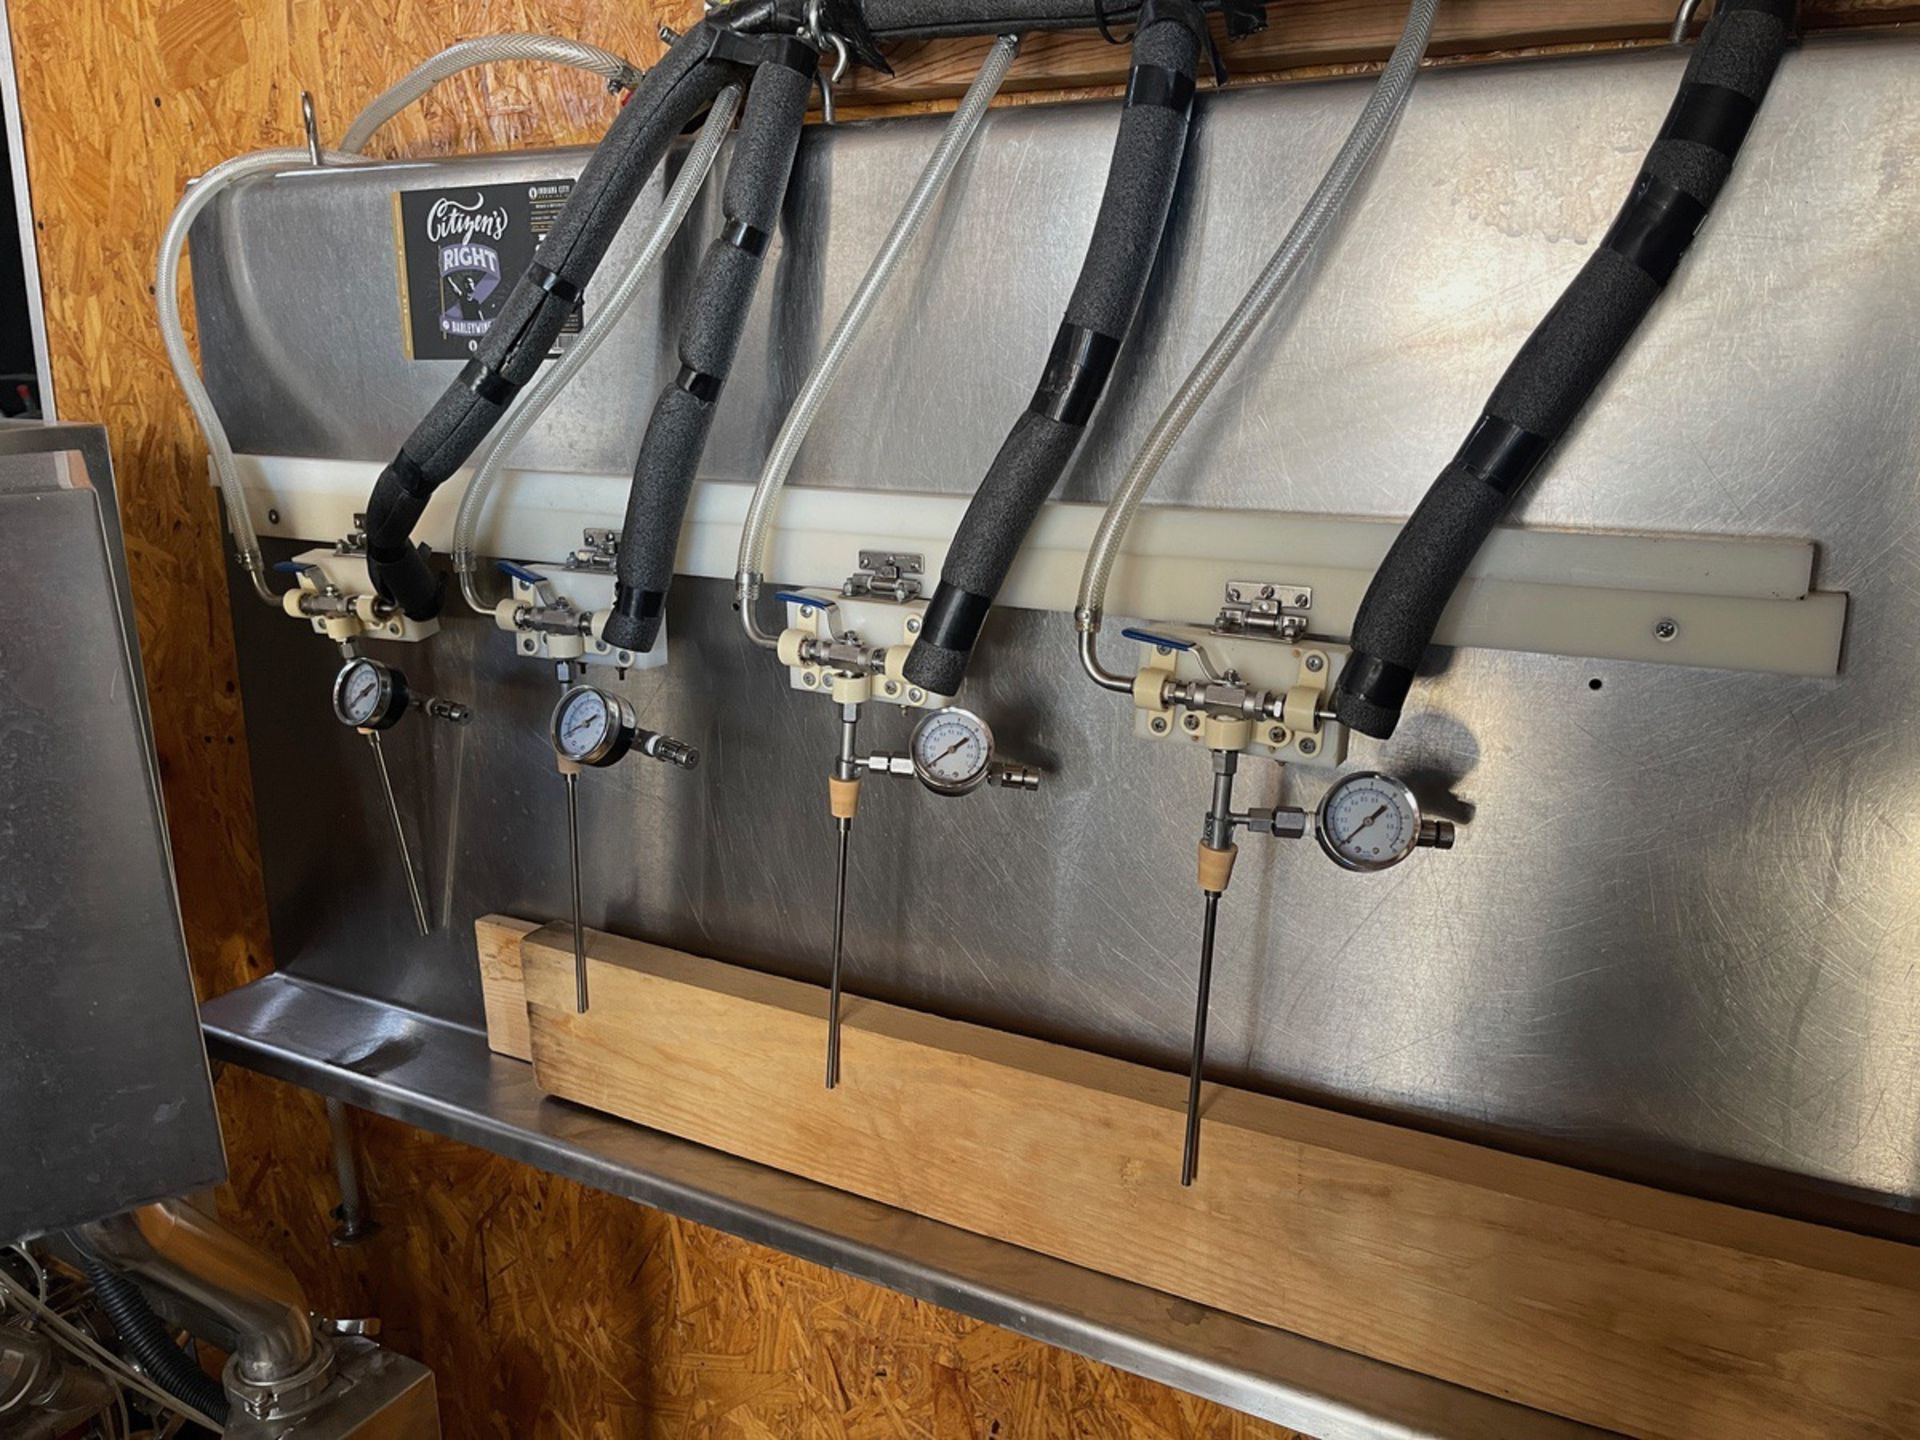 4 Head Counter Pressure Filling Station with Stainless Steel Trough | Rig Fee $250